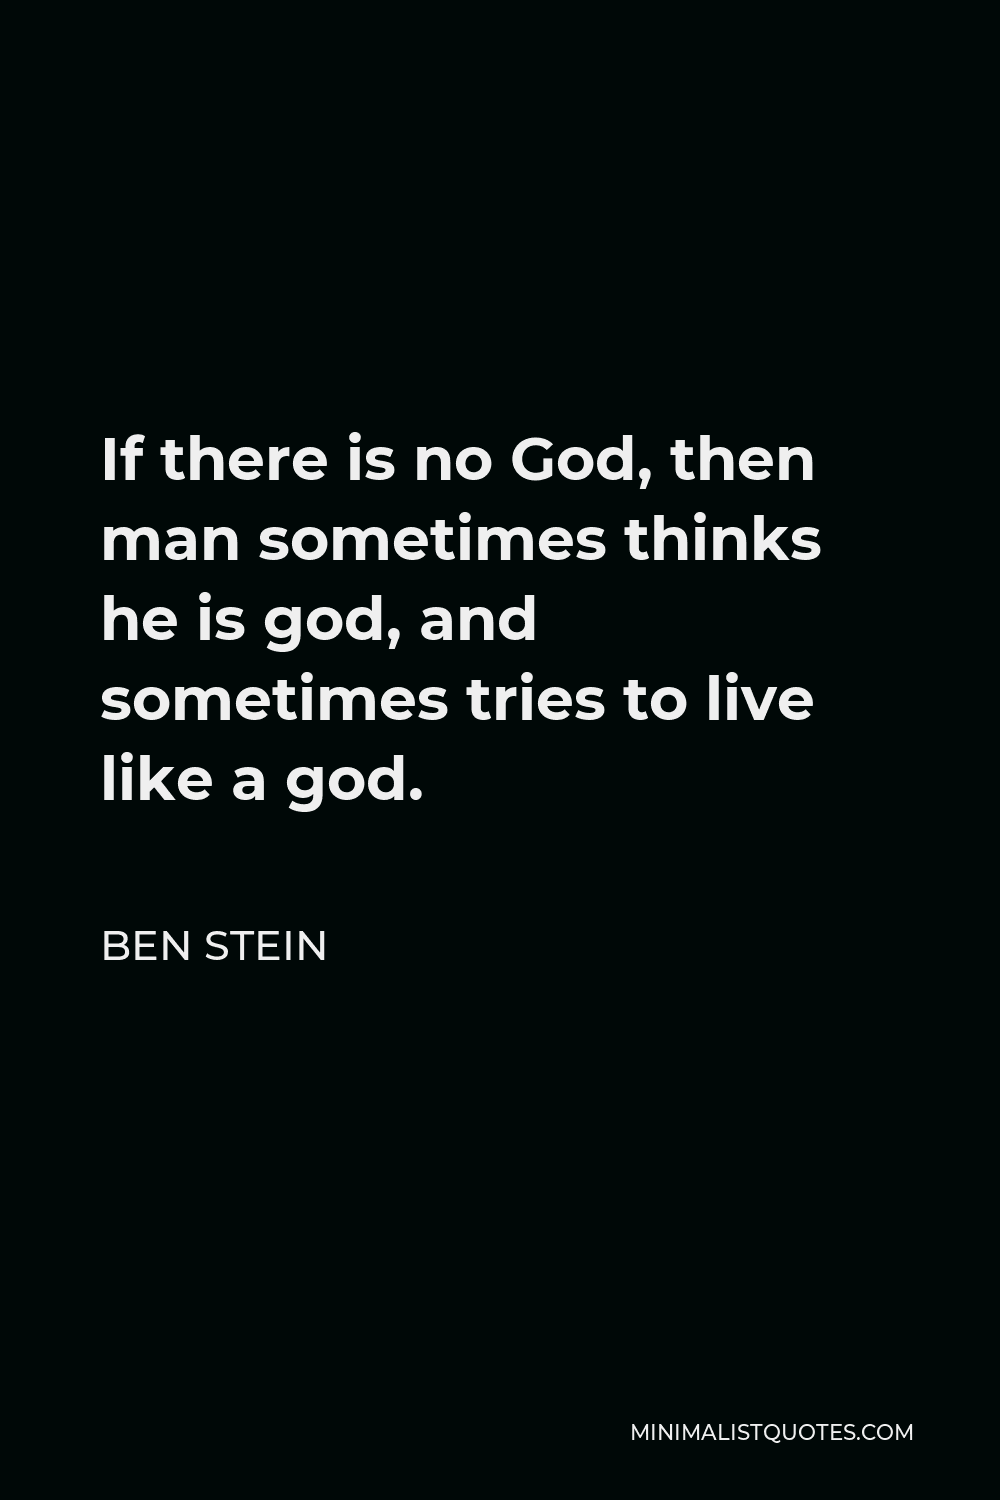 Ben Stein Quote - If there is no God, then man sometimes thinks he is god, and sometimes tries to live like a god.